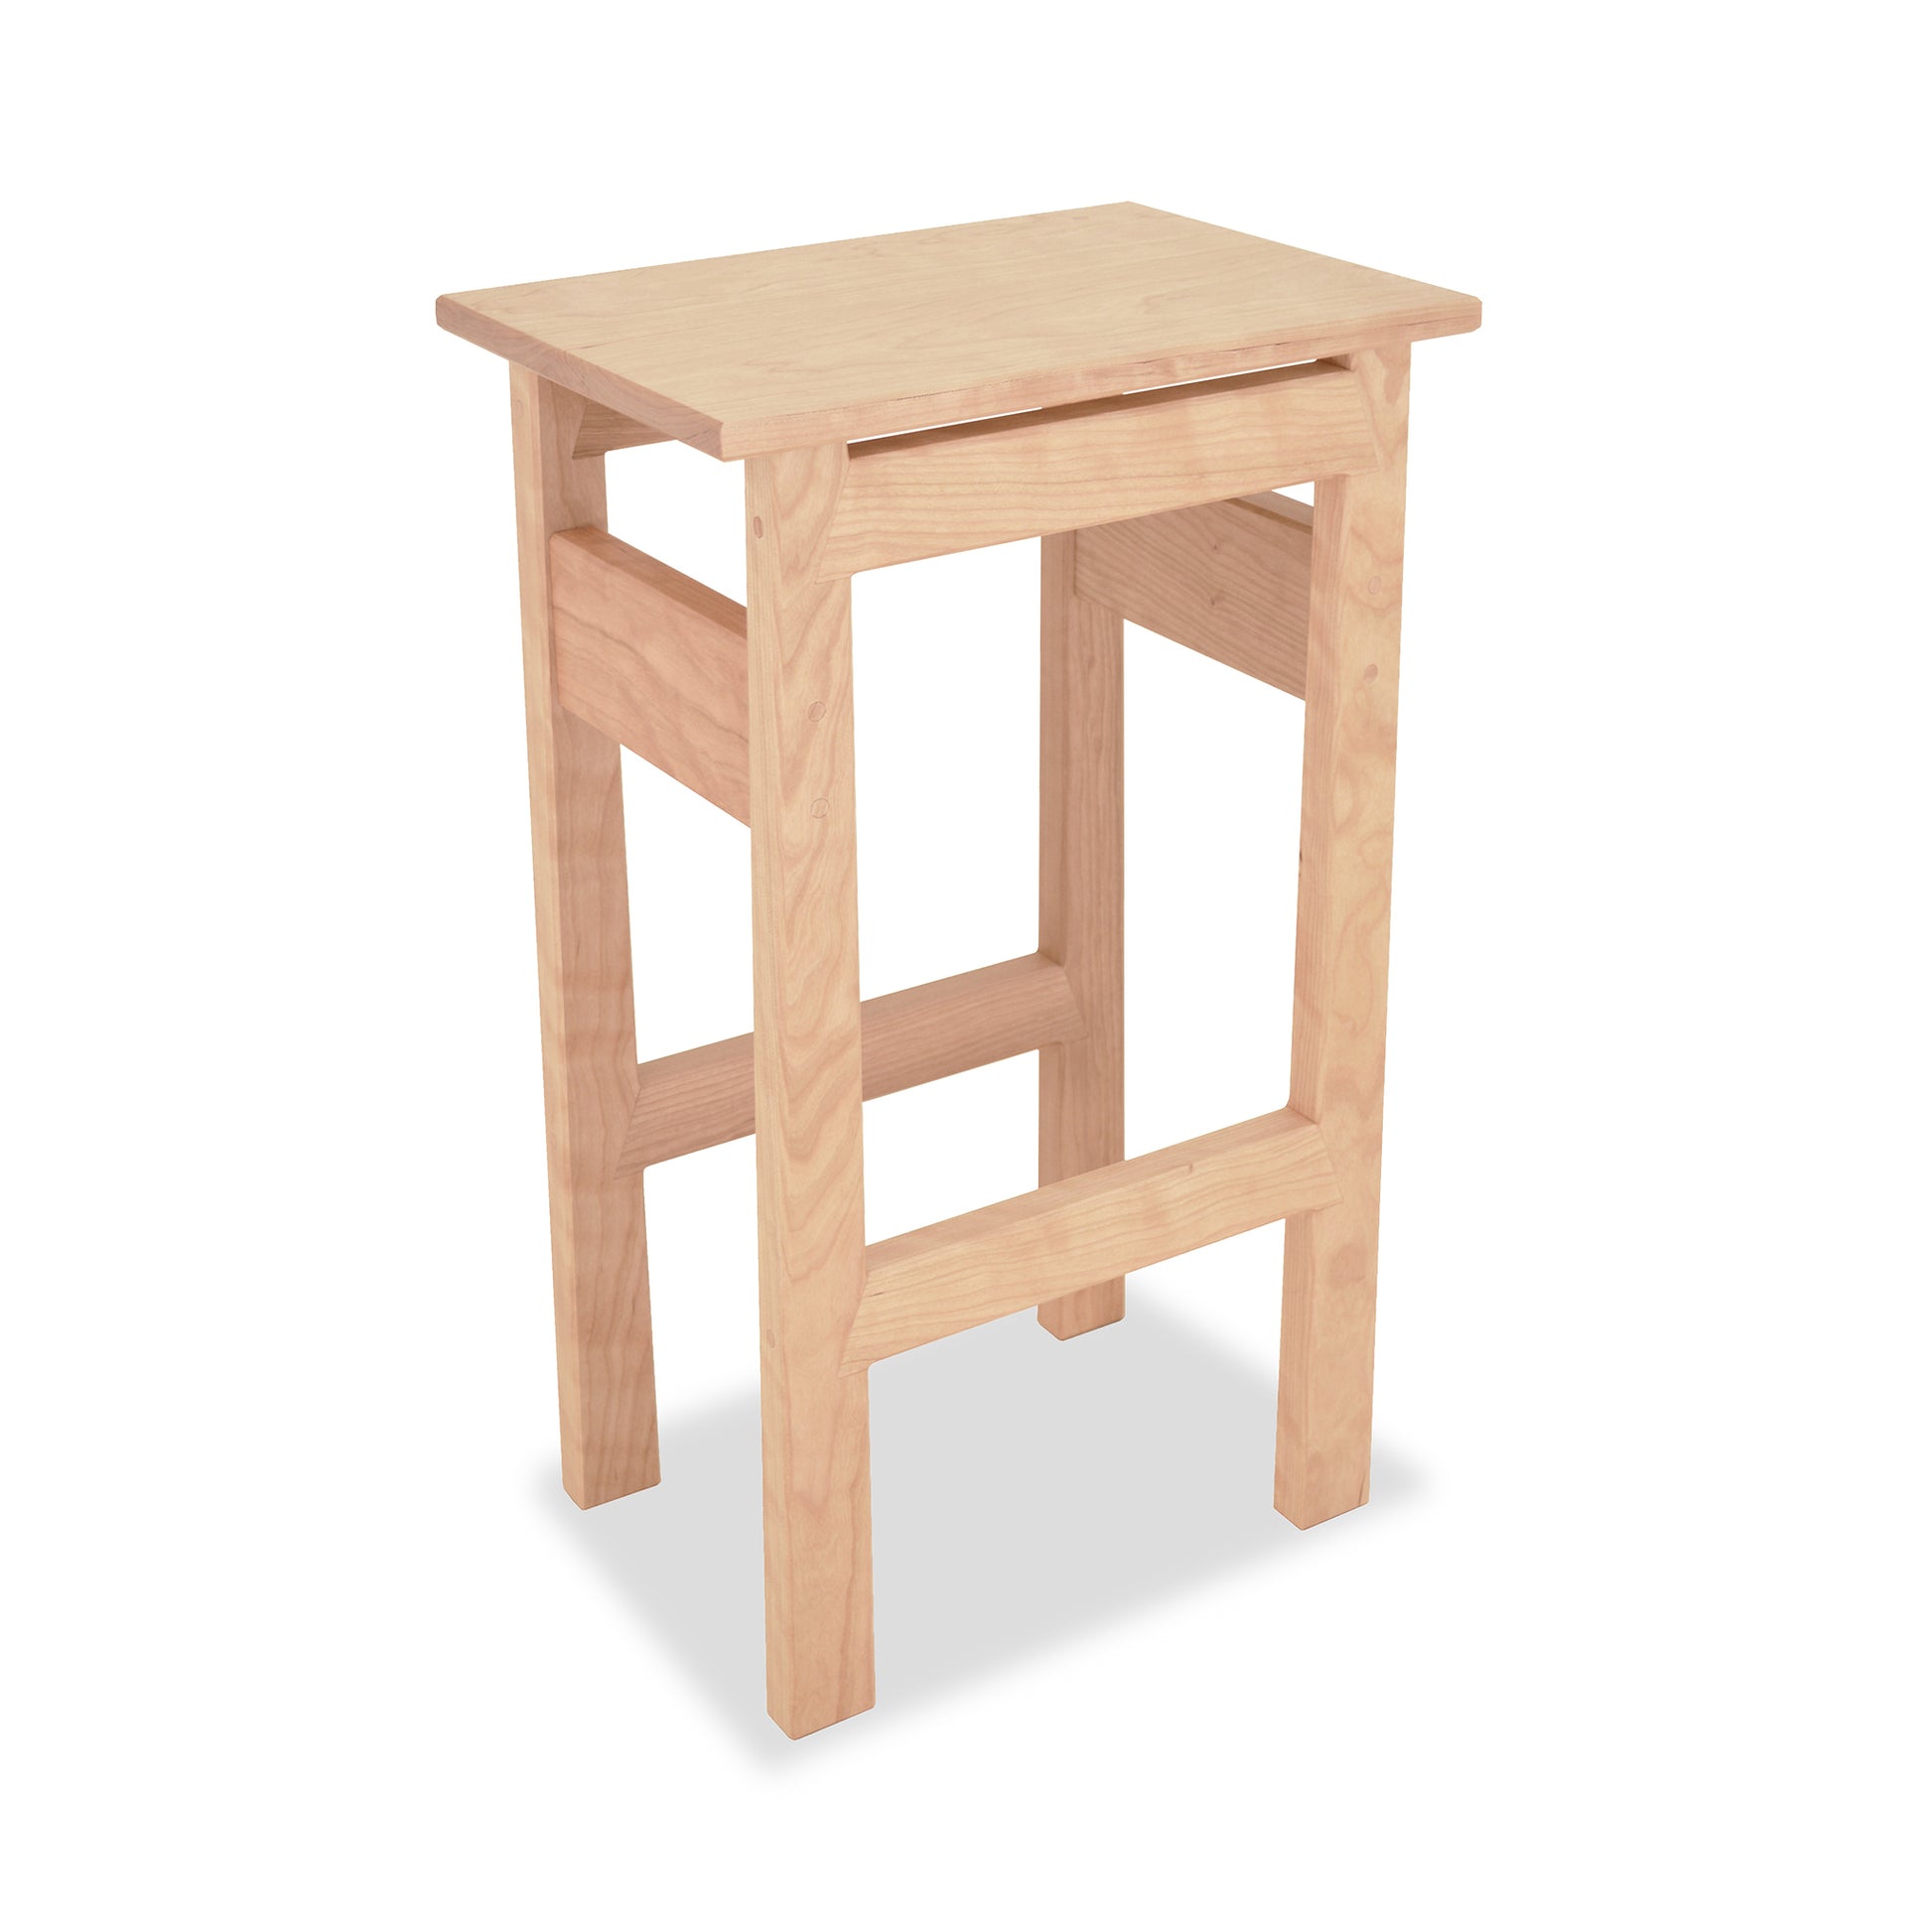 A Maple Corner Woodworks contemporary Asian stool crafted from eco-friendly natural wood, isolated on a white background.